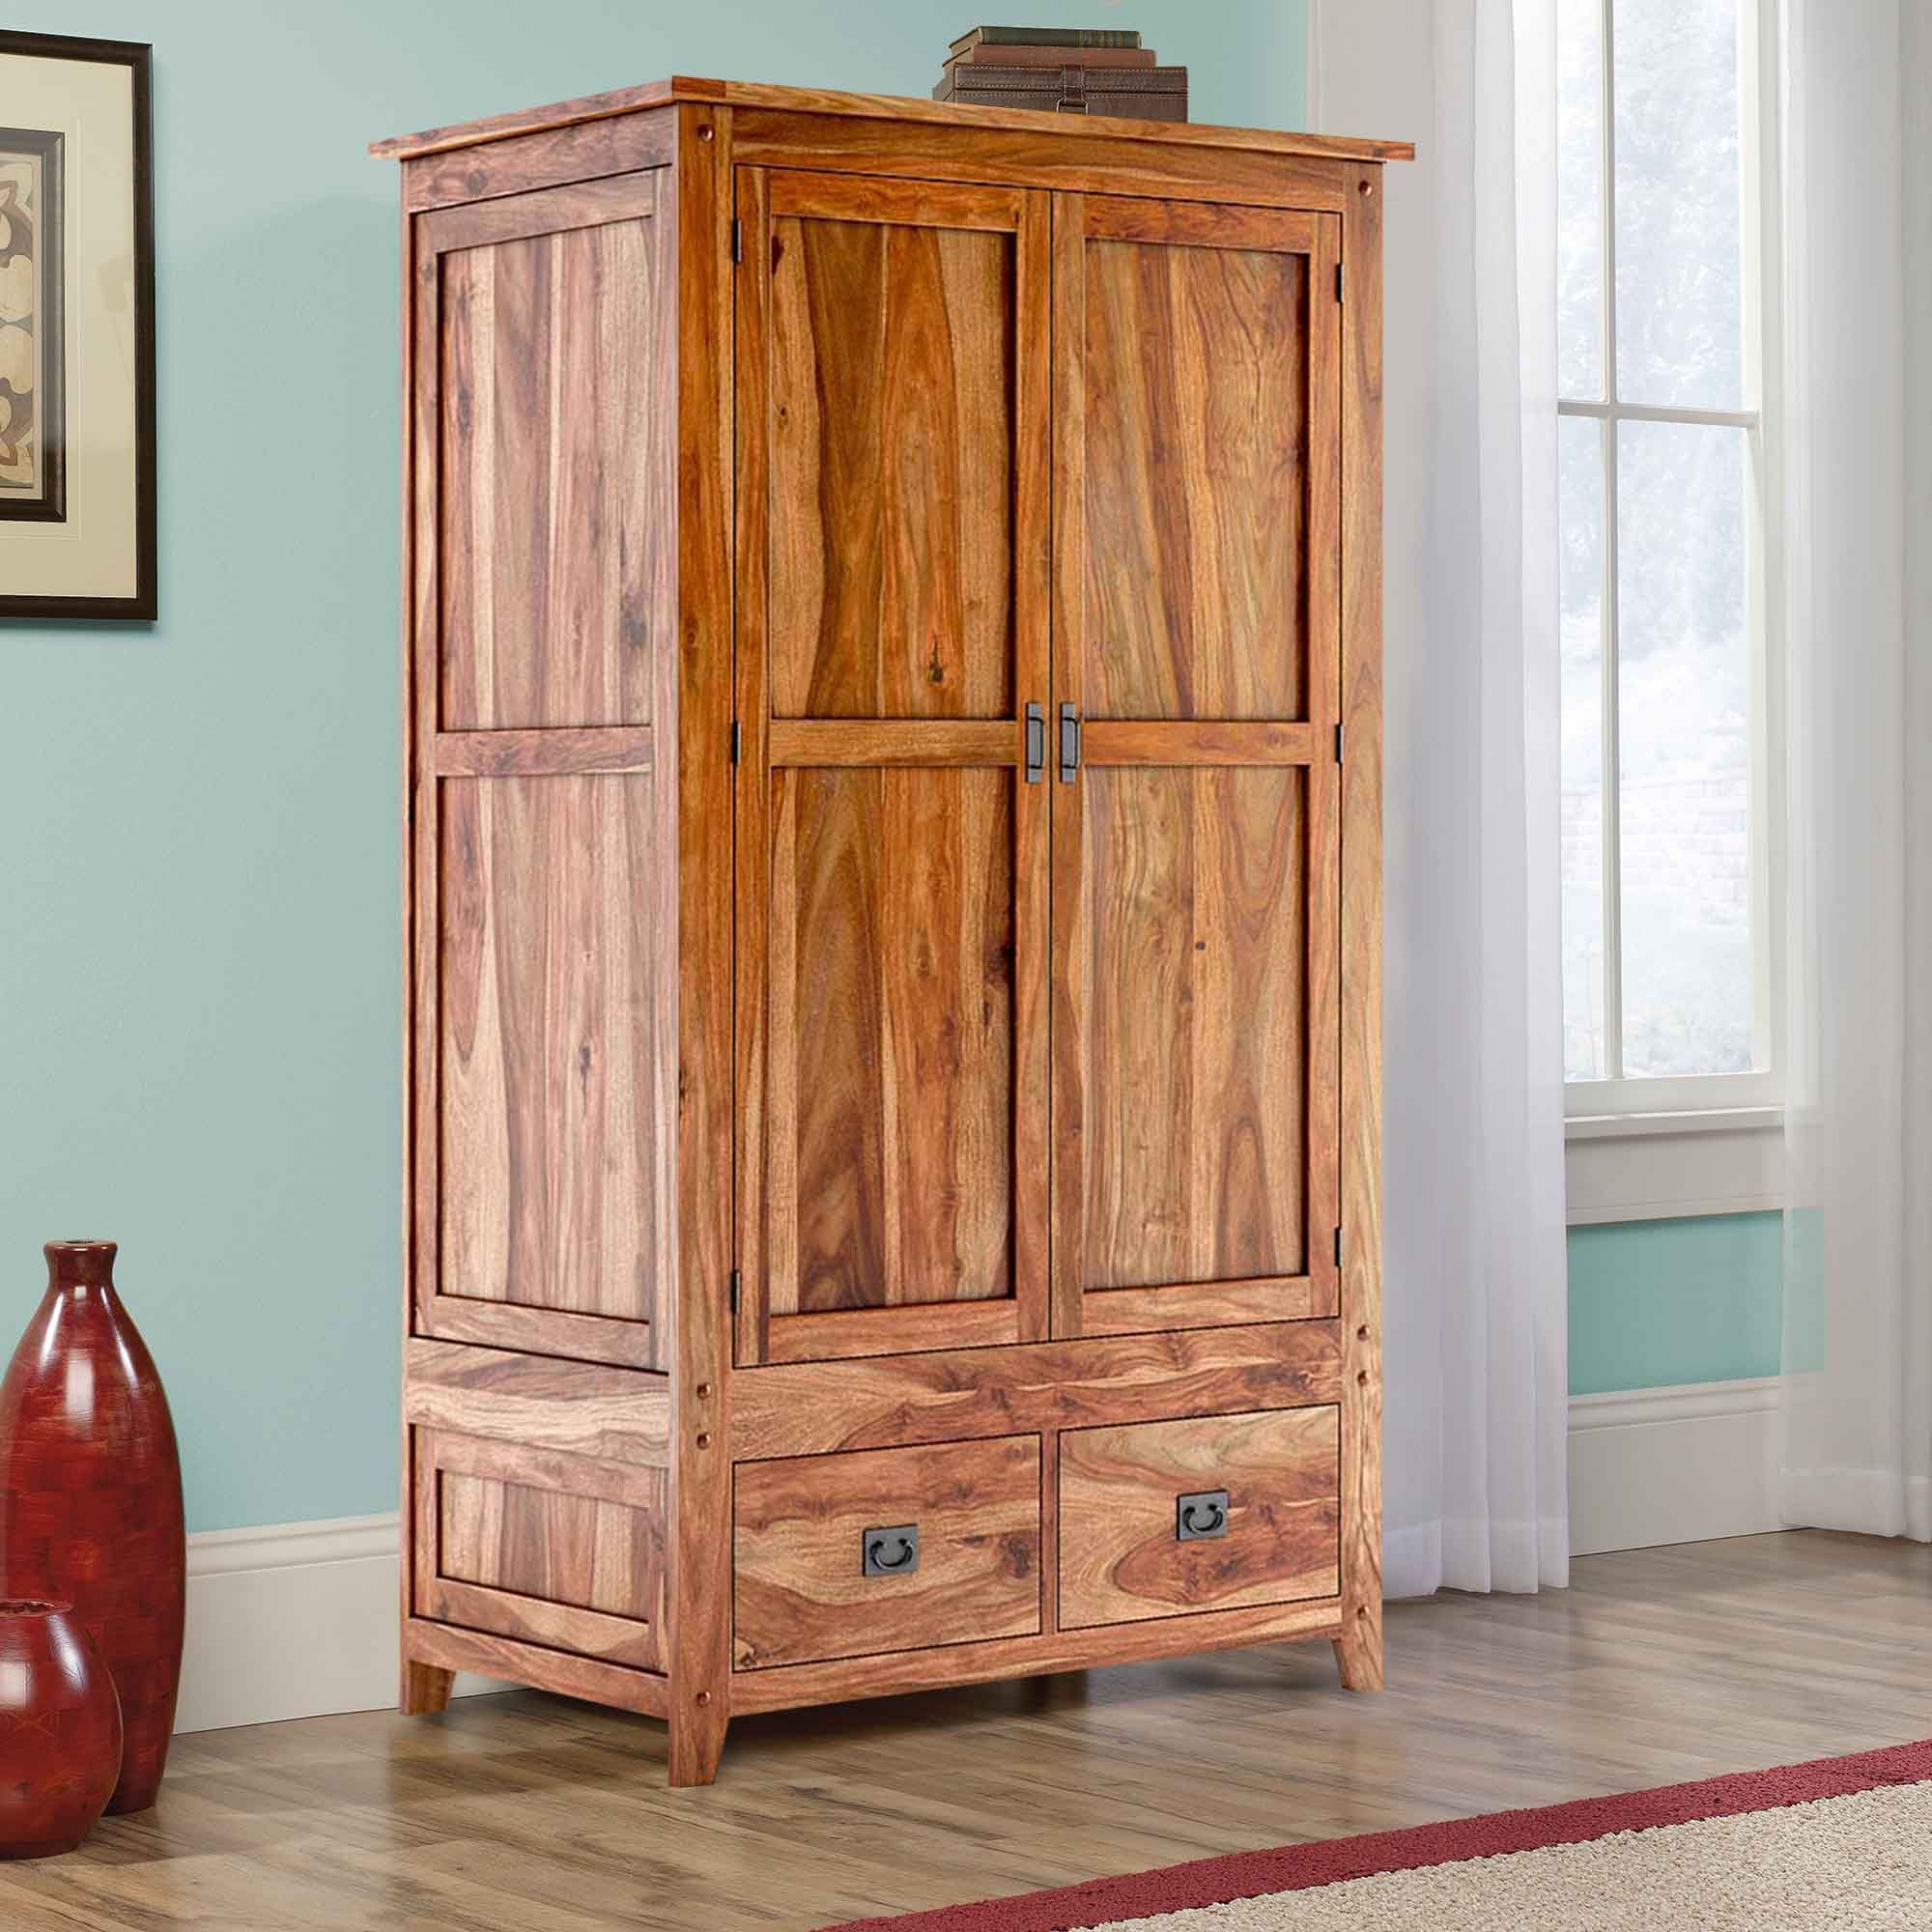 Delaware Farmhouse Solid Wood Wardrobe Armoire With Drawers For Wardrobes And Armoires (View 15 of 20)